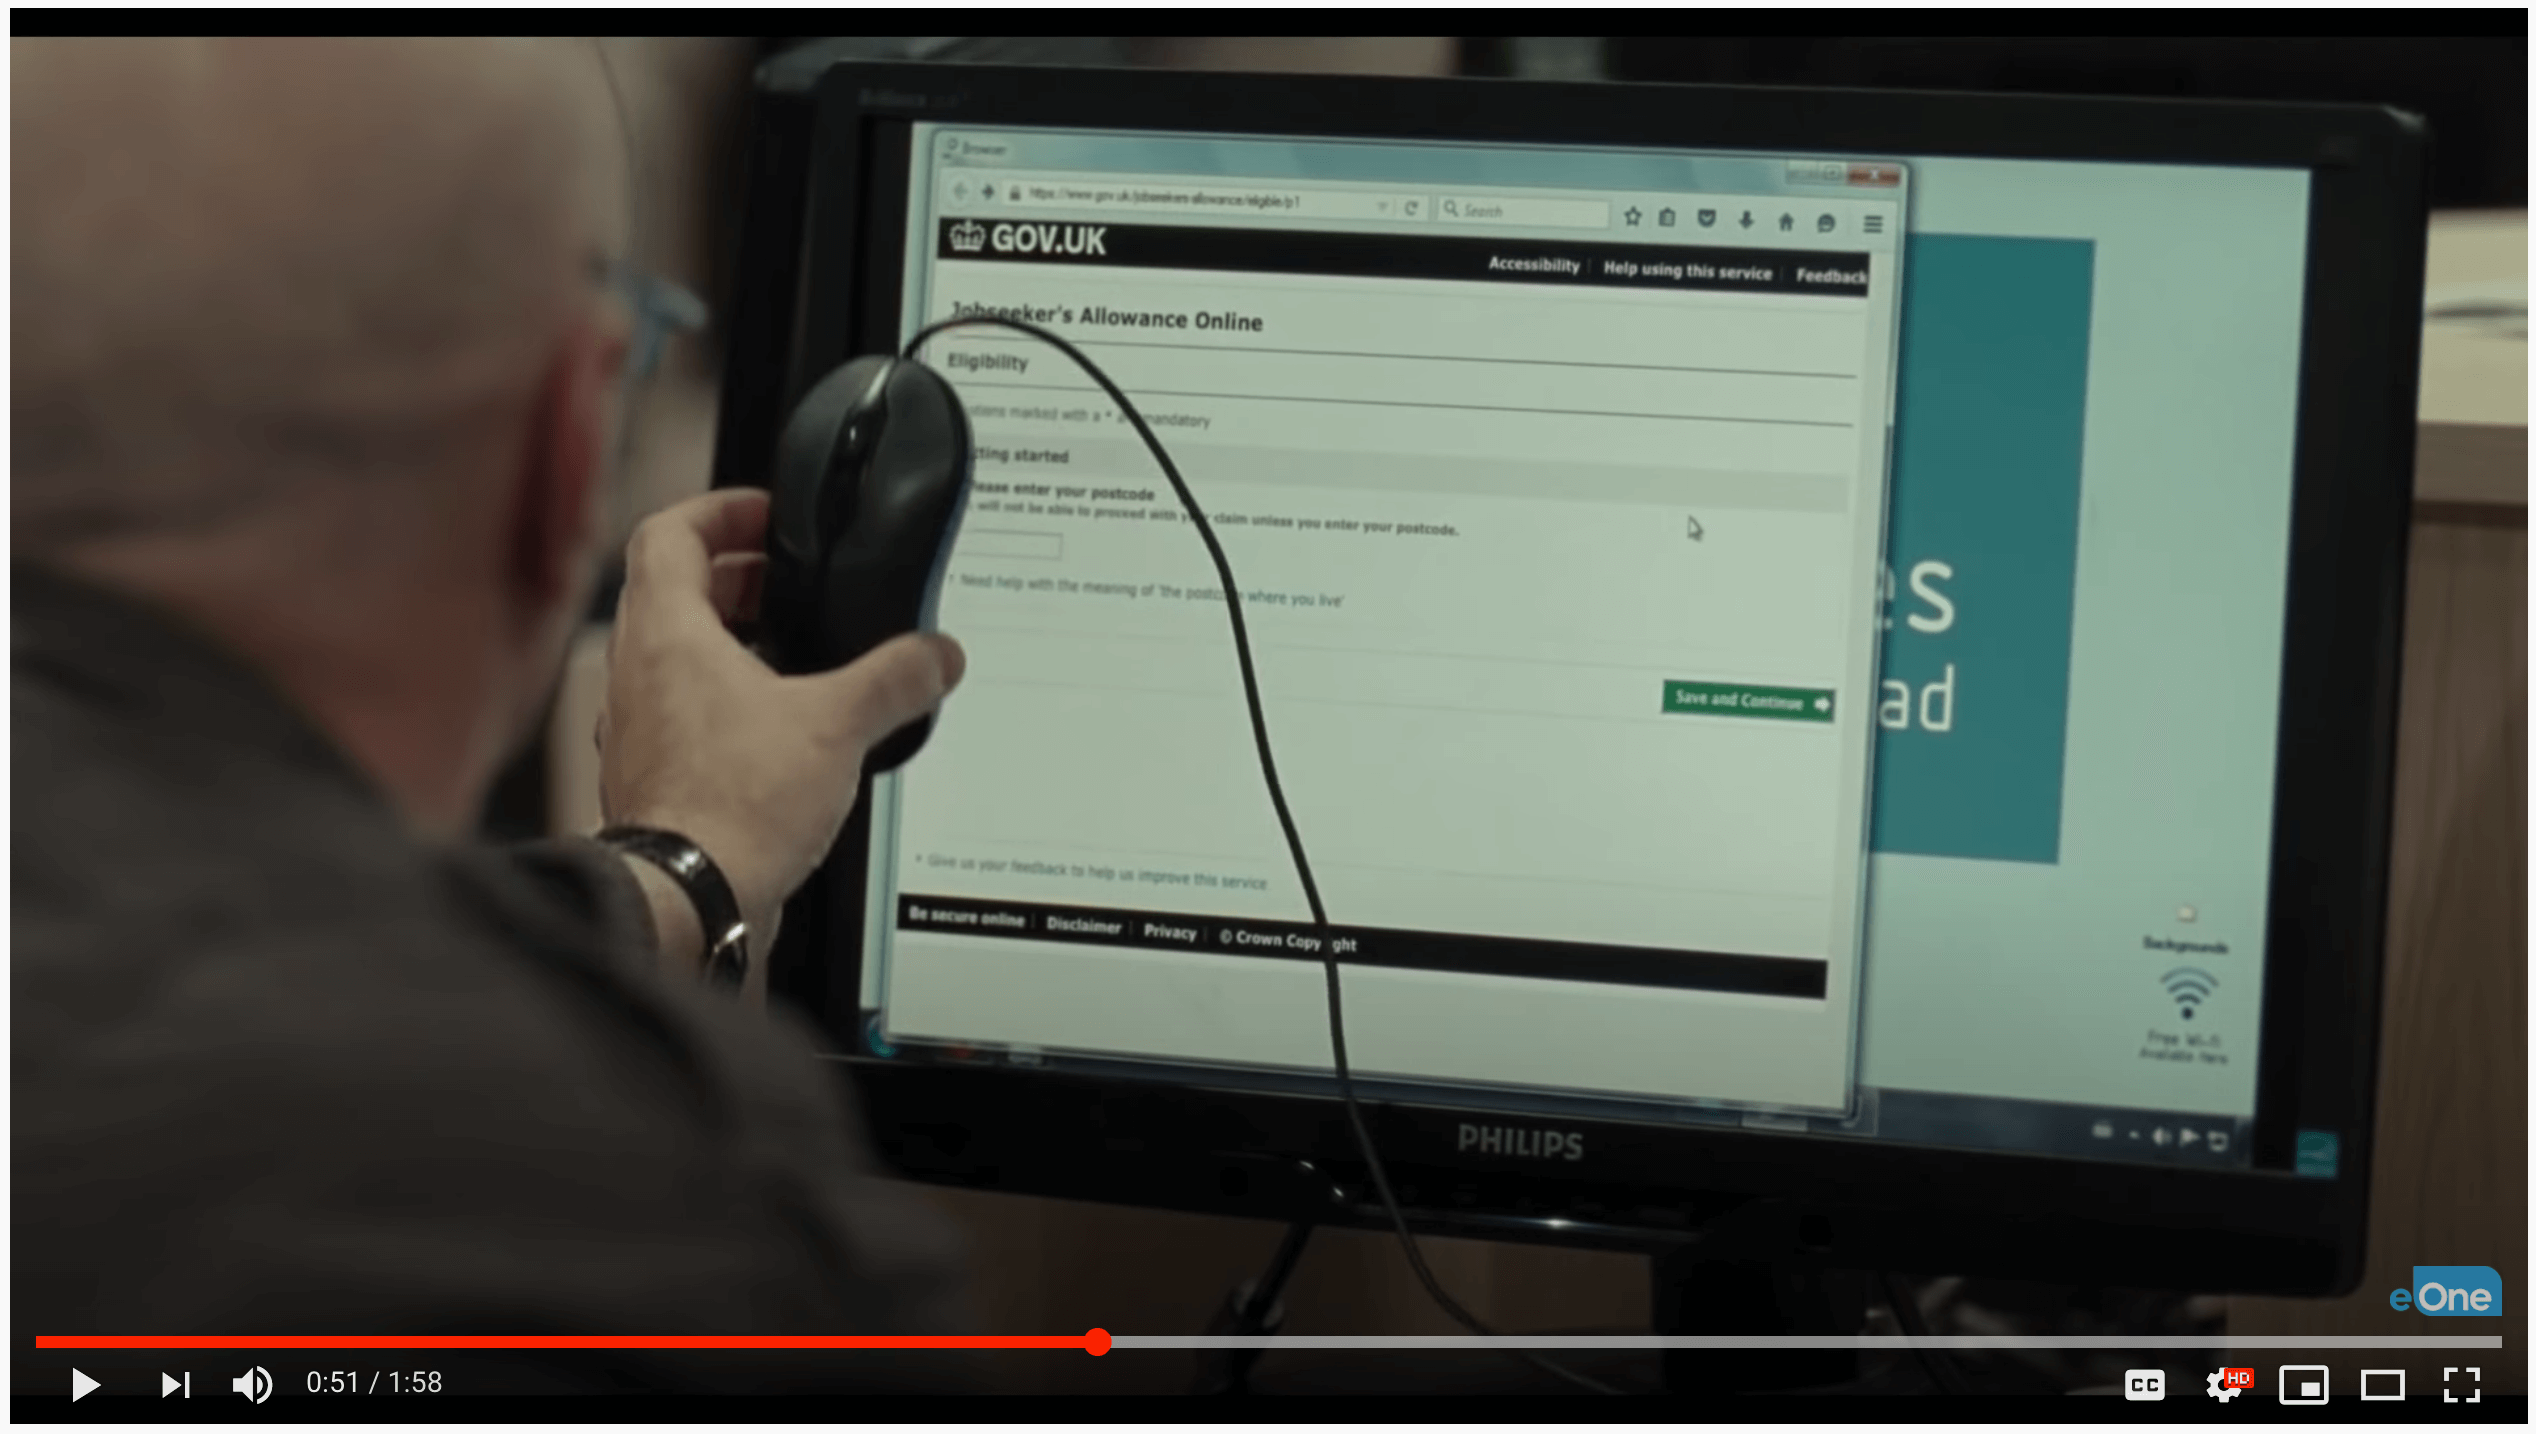 A screenshot of the trailer for the movie I, Daniel Blake on YouTube, showing Daniel Blake trying to use a computer to apply for support.